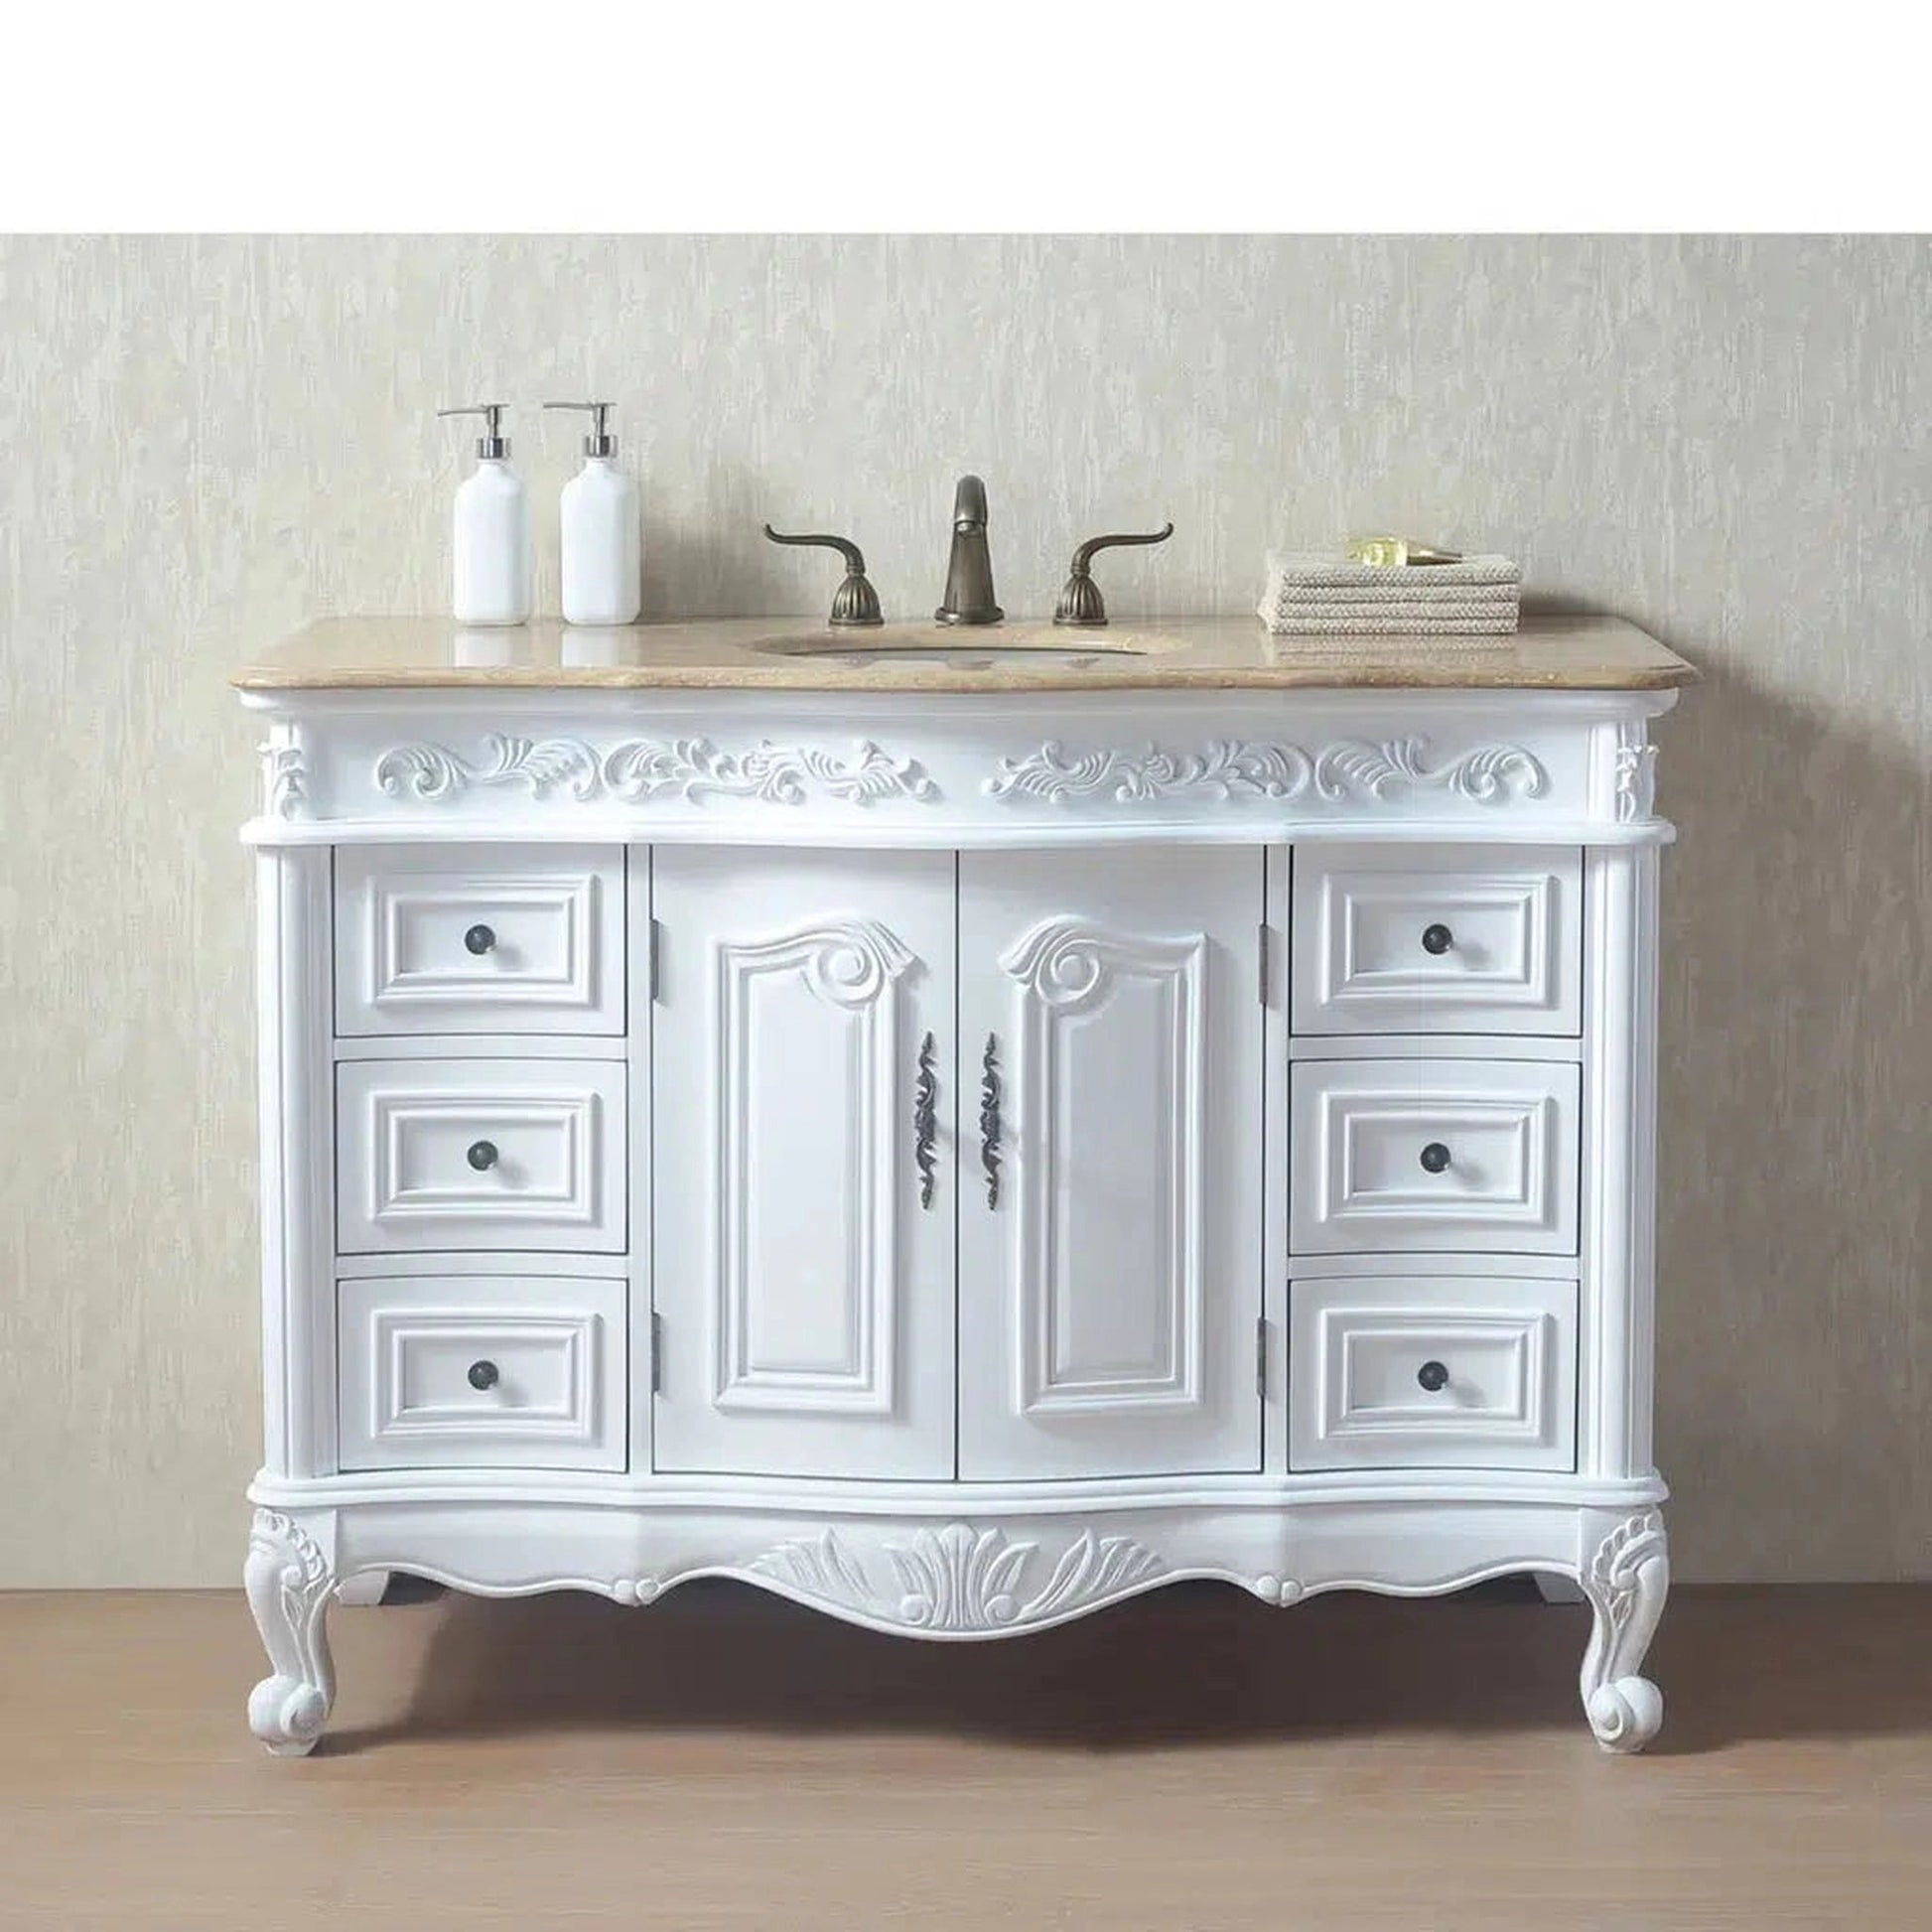 Stufurhome Cassandra 48" White 6-Drawers 2-Door Freestanding White Bathroom Vanity With Oval Single Sink, Travertine Marble Countertop and Widespread Faucet Holes